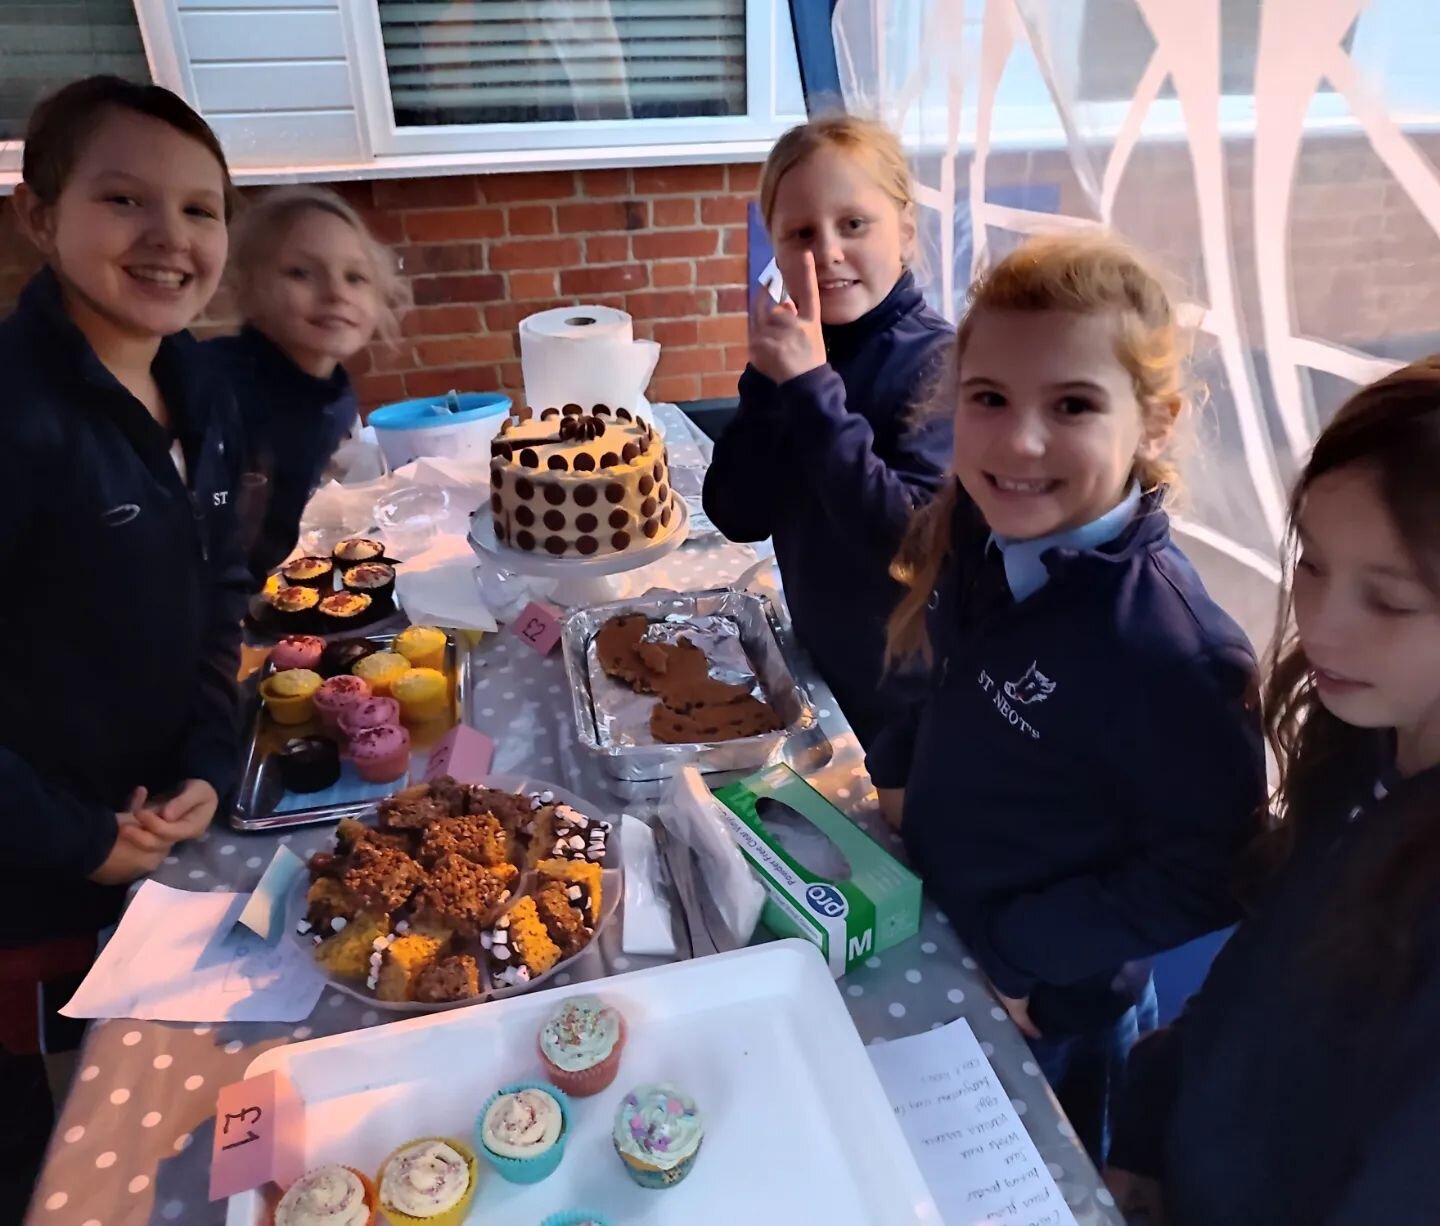 Despite the weather yesterday afternoon, Year 4 were out in force selling their homemade tasty treats and pretty pictures. With the support of their parents, they worked through the cold to sell for over an hour! Their efforts paid off as they raised